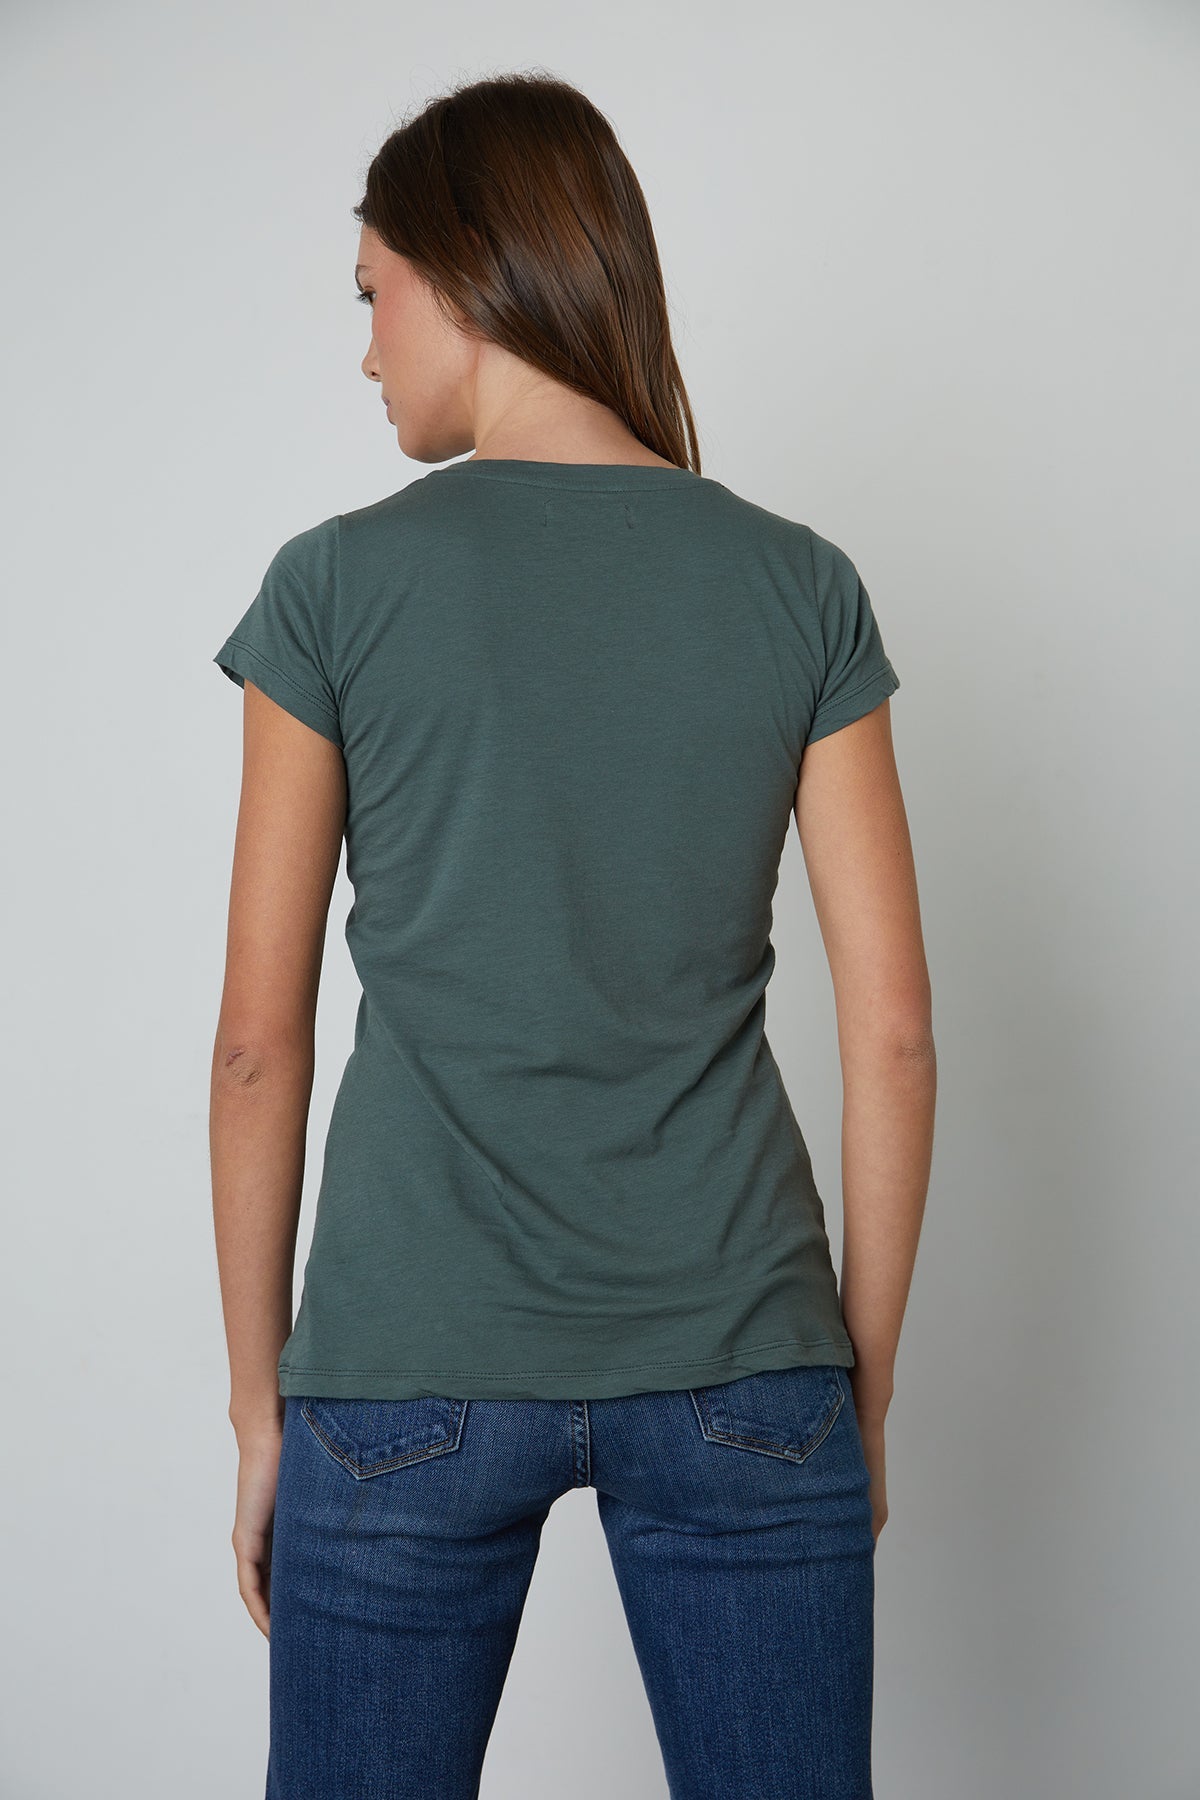   the back view of a woman wearing jeans and a Velvet by Graham & Spencer JEMMA GAUZY WHISPER FITTED CREW NECK TEE. 